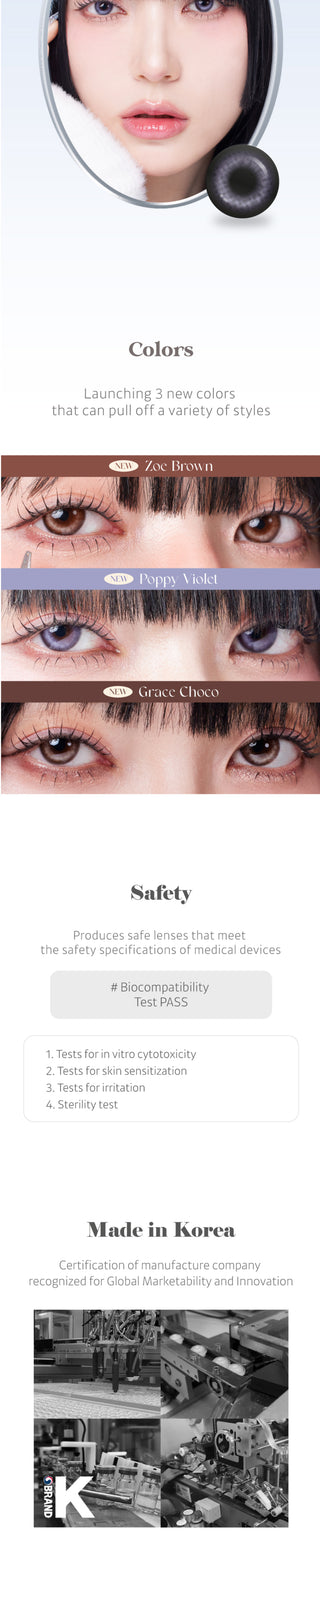 Several views of a Korean model with the Dollring Poppy Violet color contact lenses. An enlargement of a model's eyes with the prescription colored contacts, demonstrating the subtle yet striking change on dark eyes.